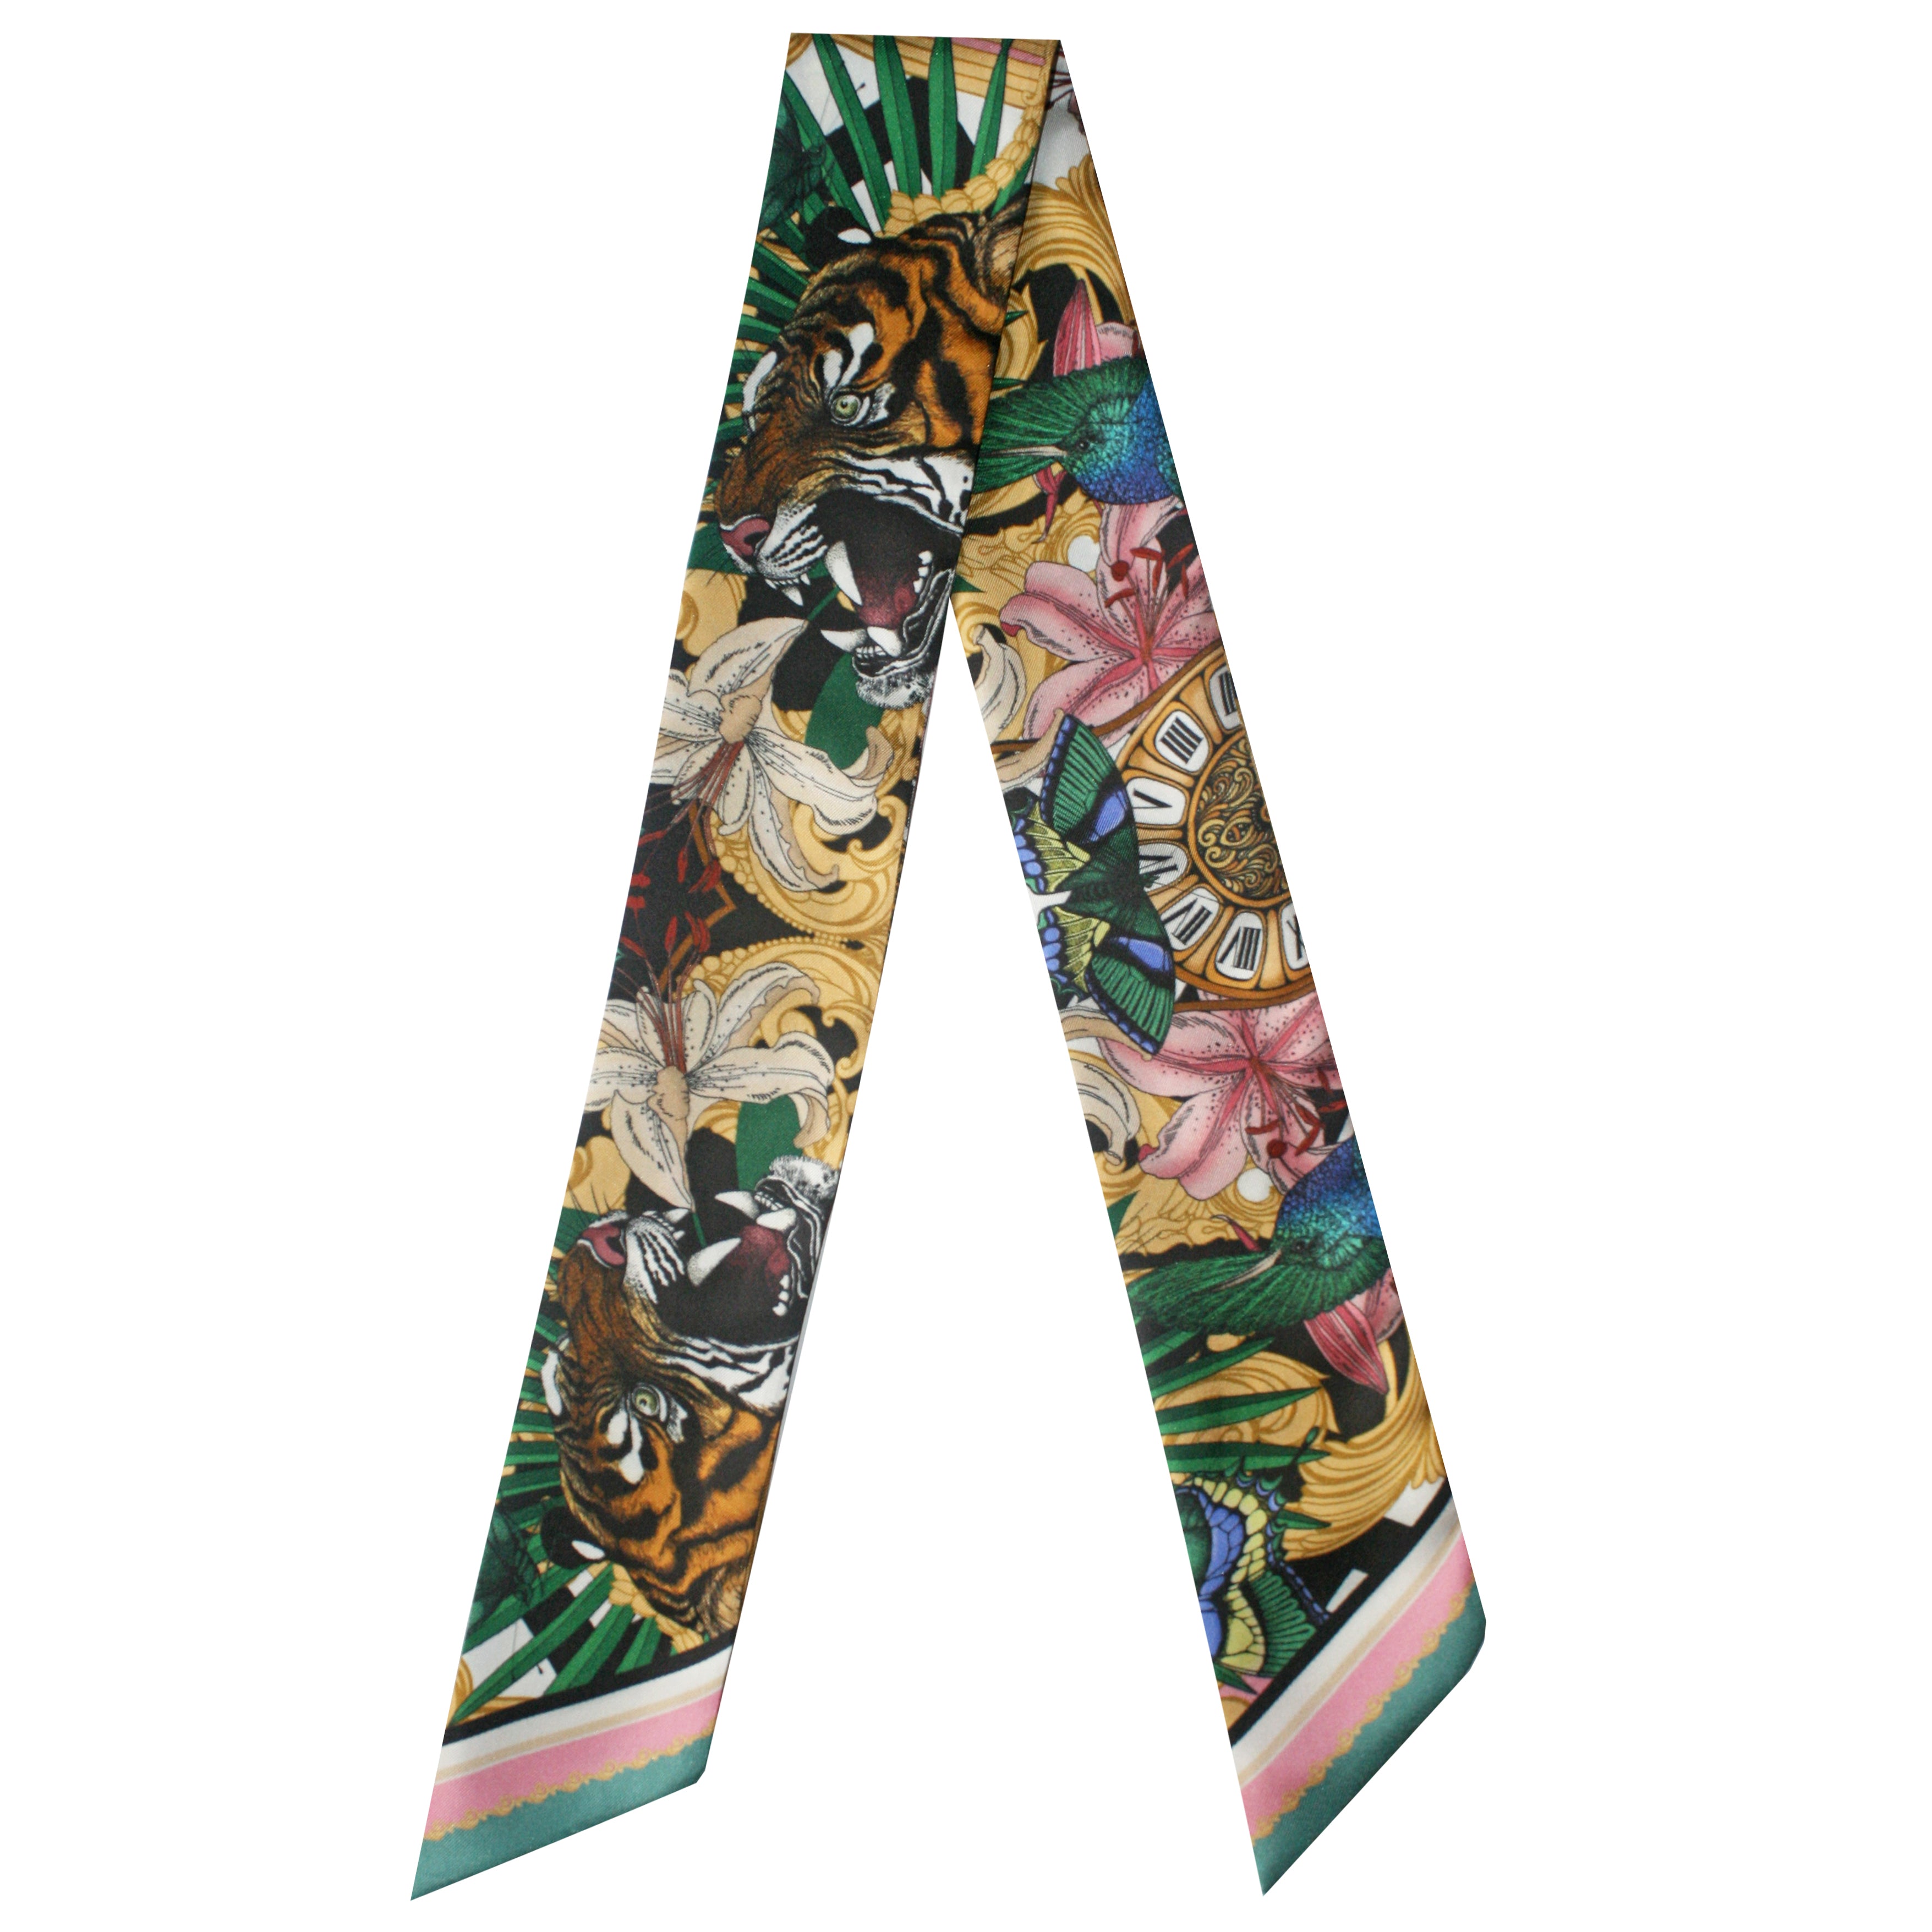 The Baroque Tiger Twilly Scarf [Preorder]